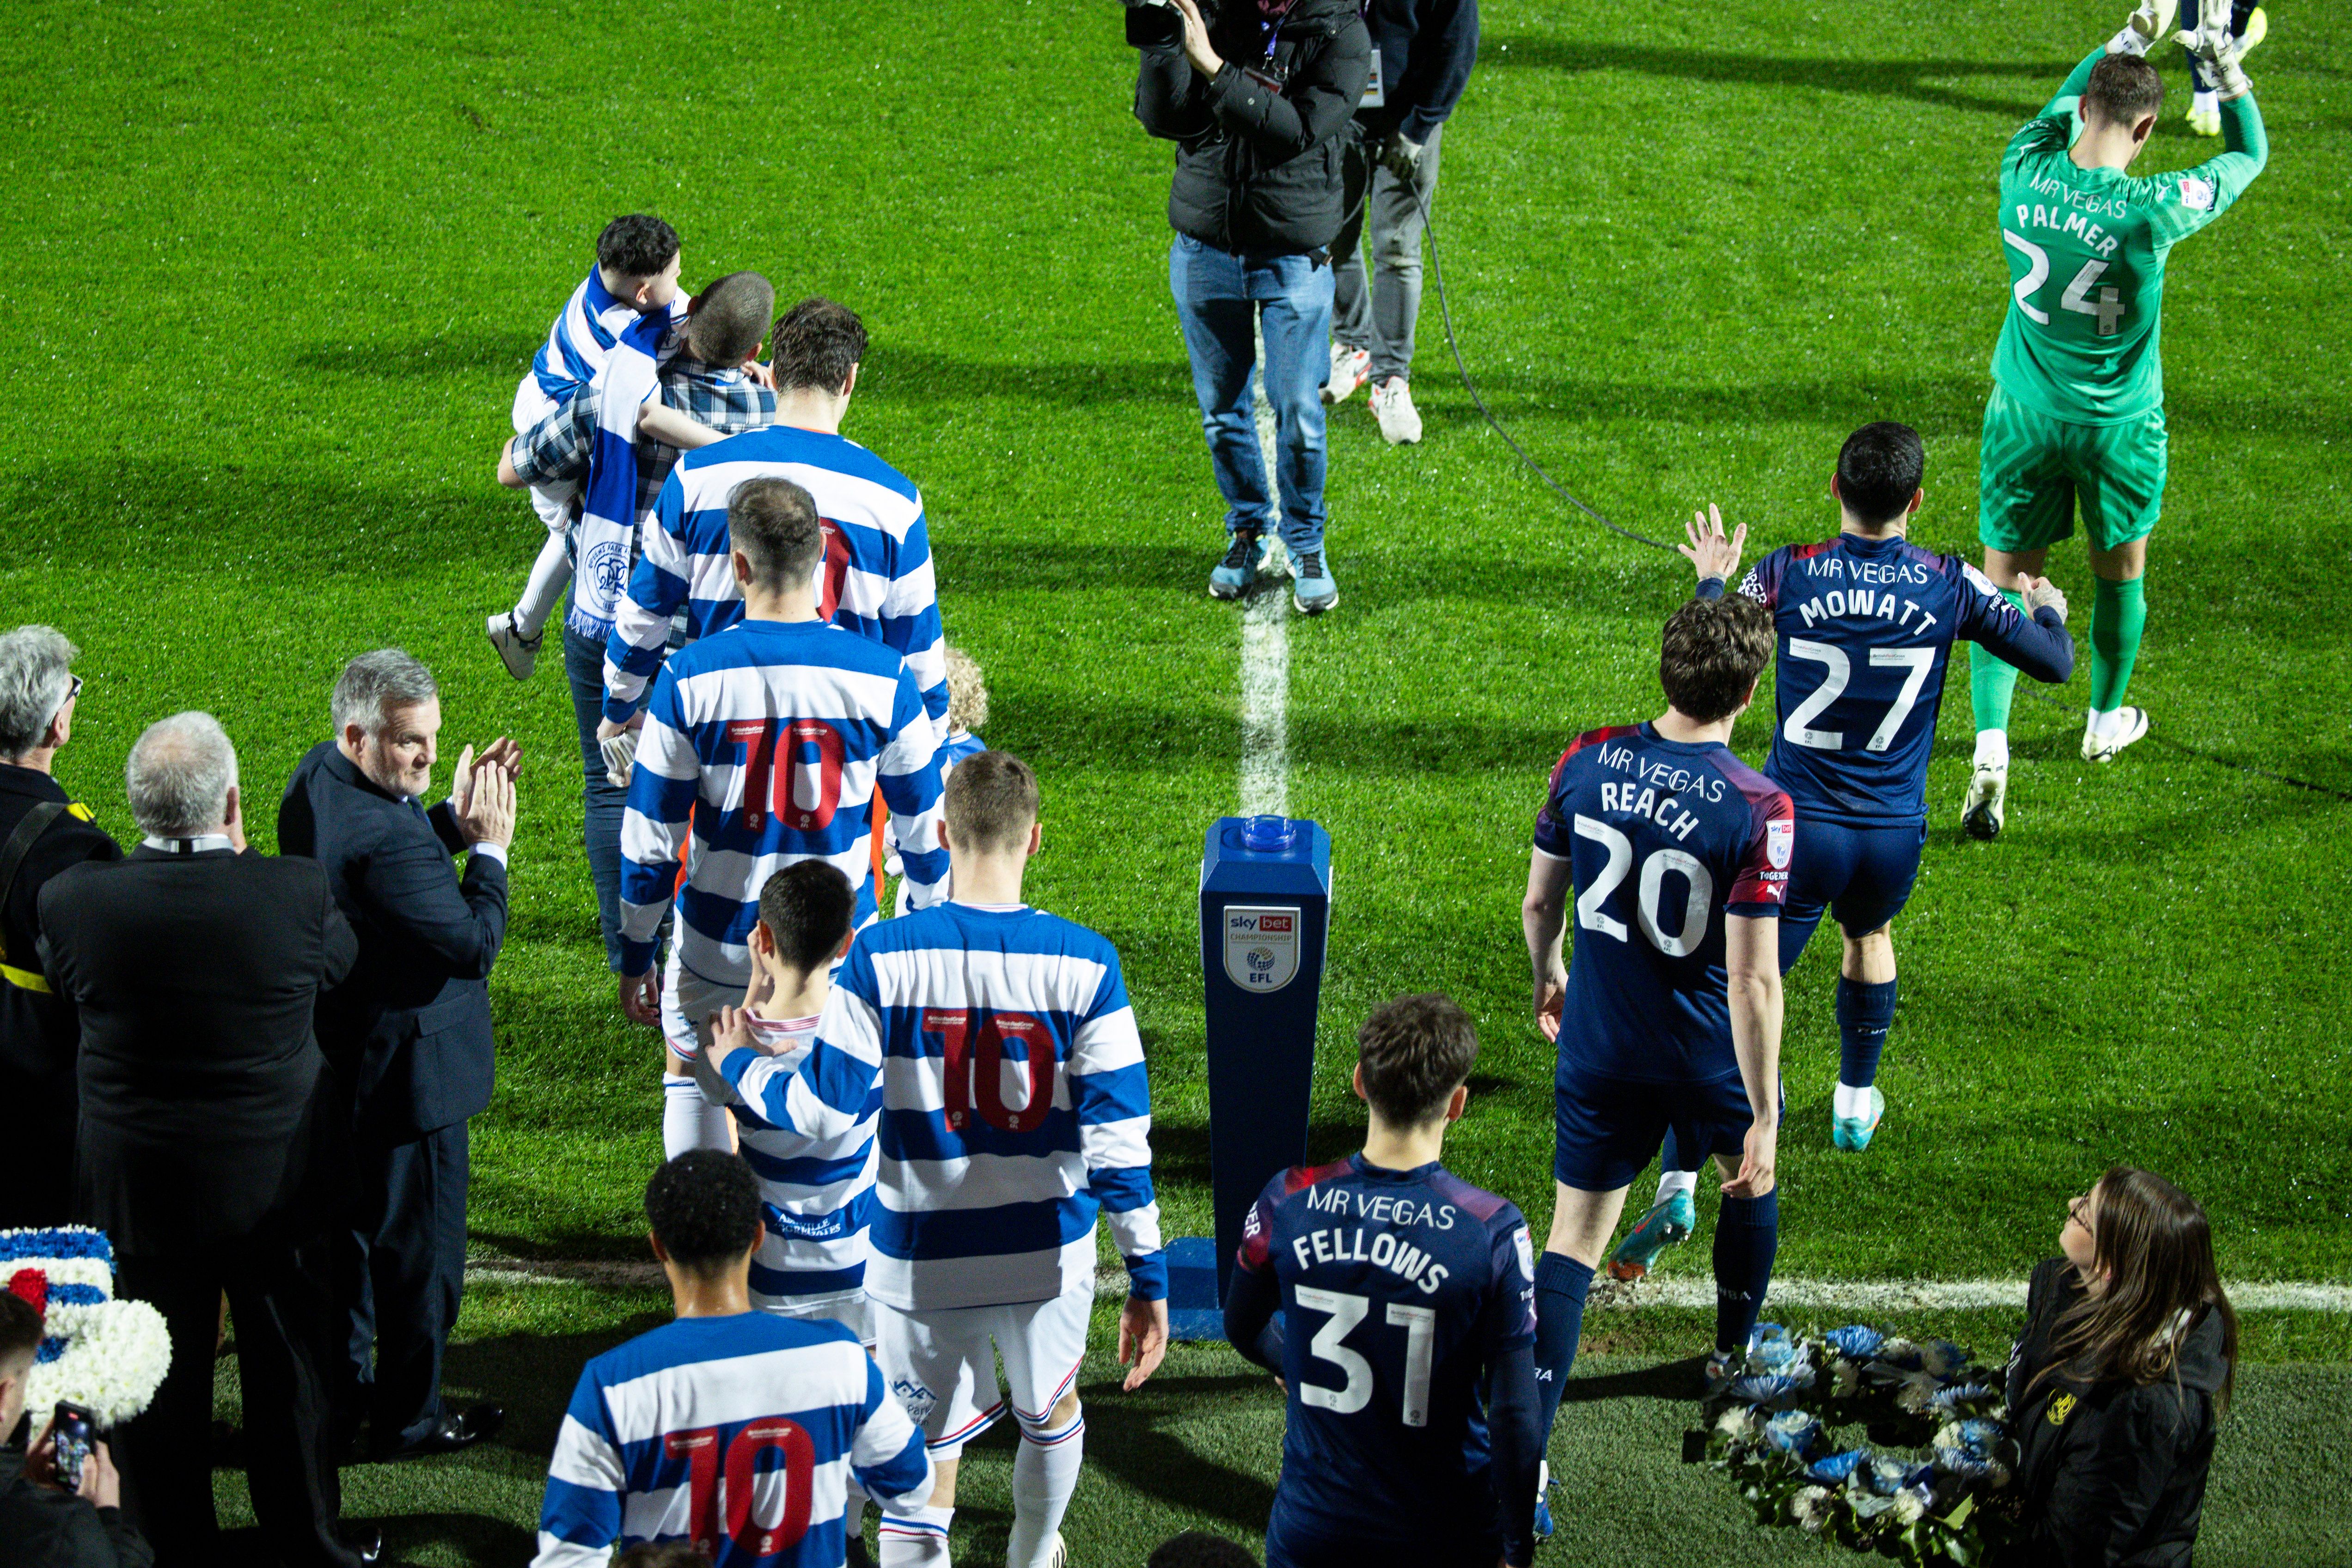 QPR and Albion players walk out on to the pitch before the game at Loftus Road